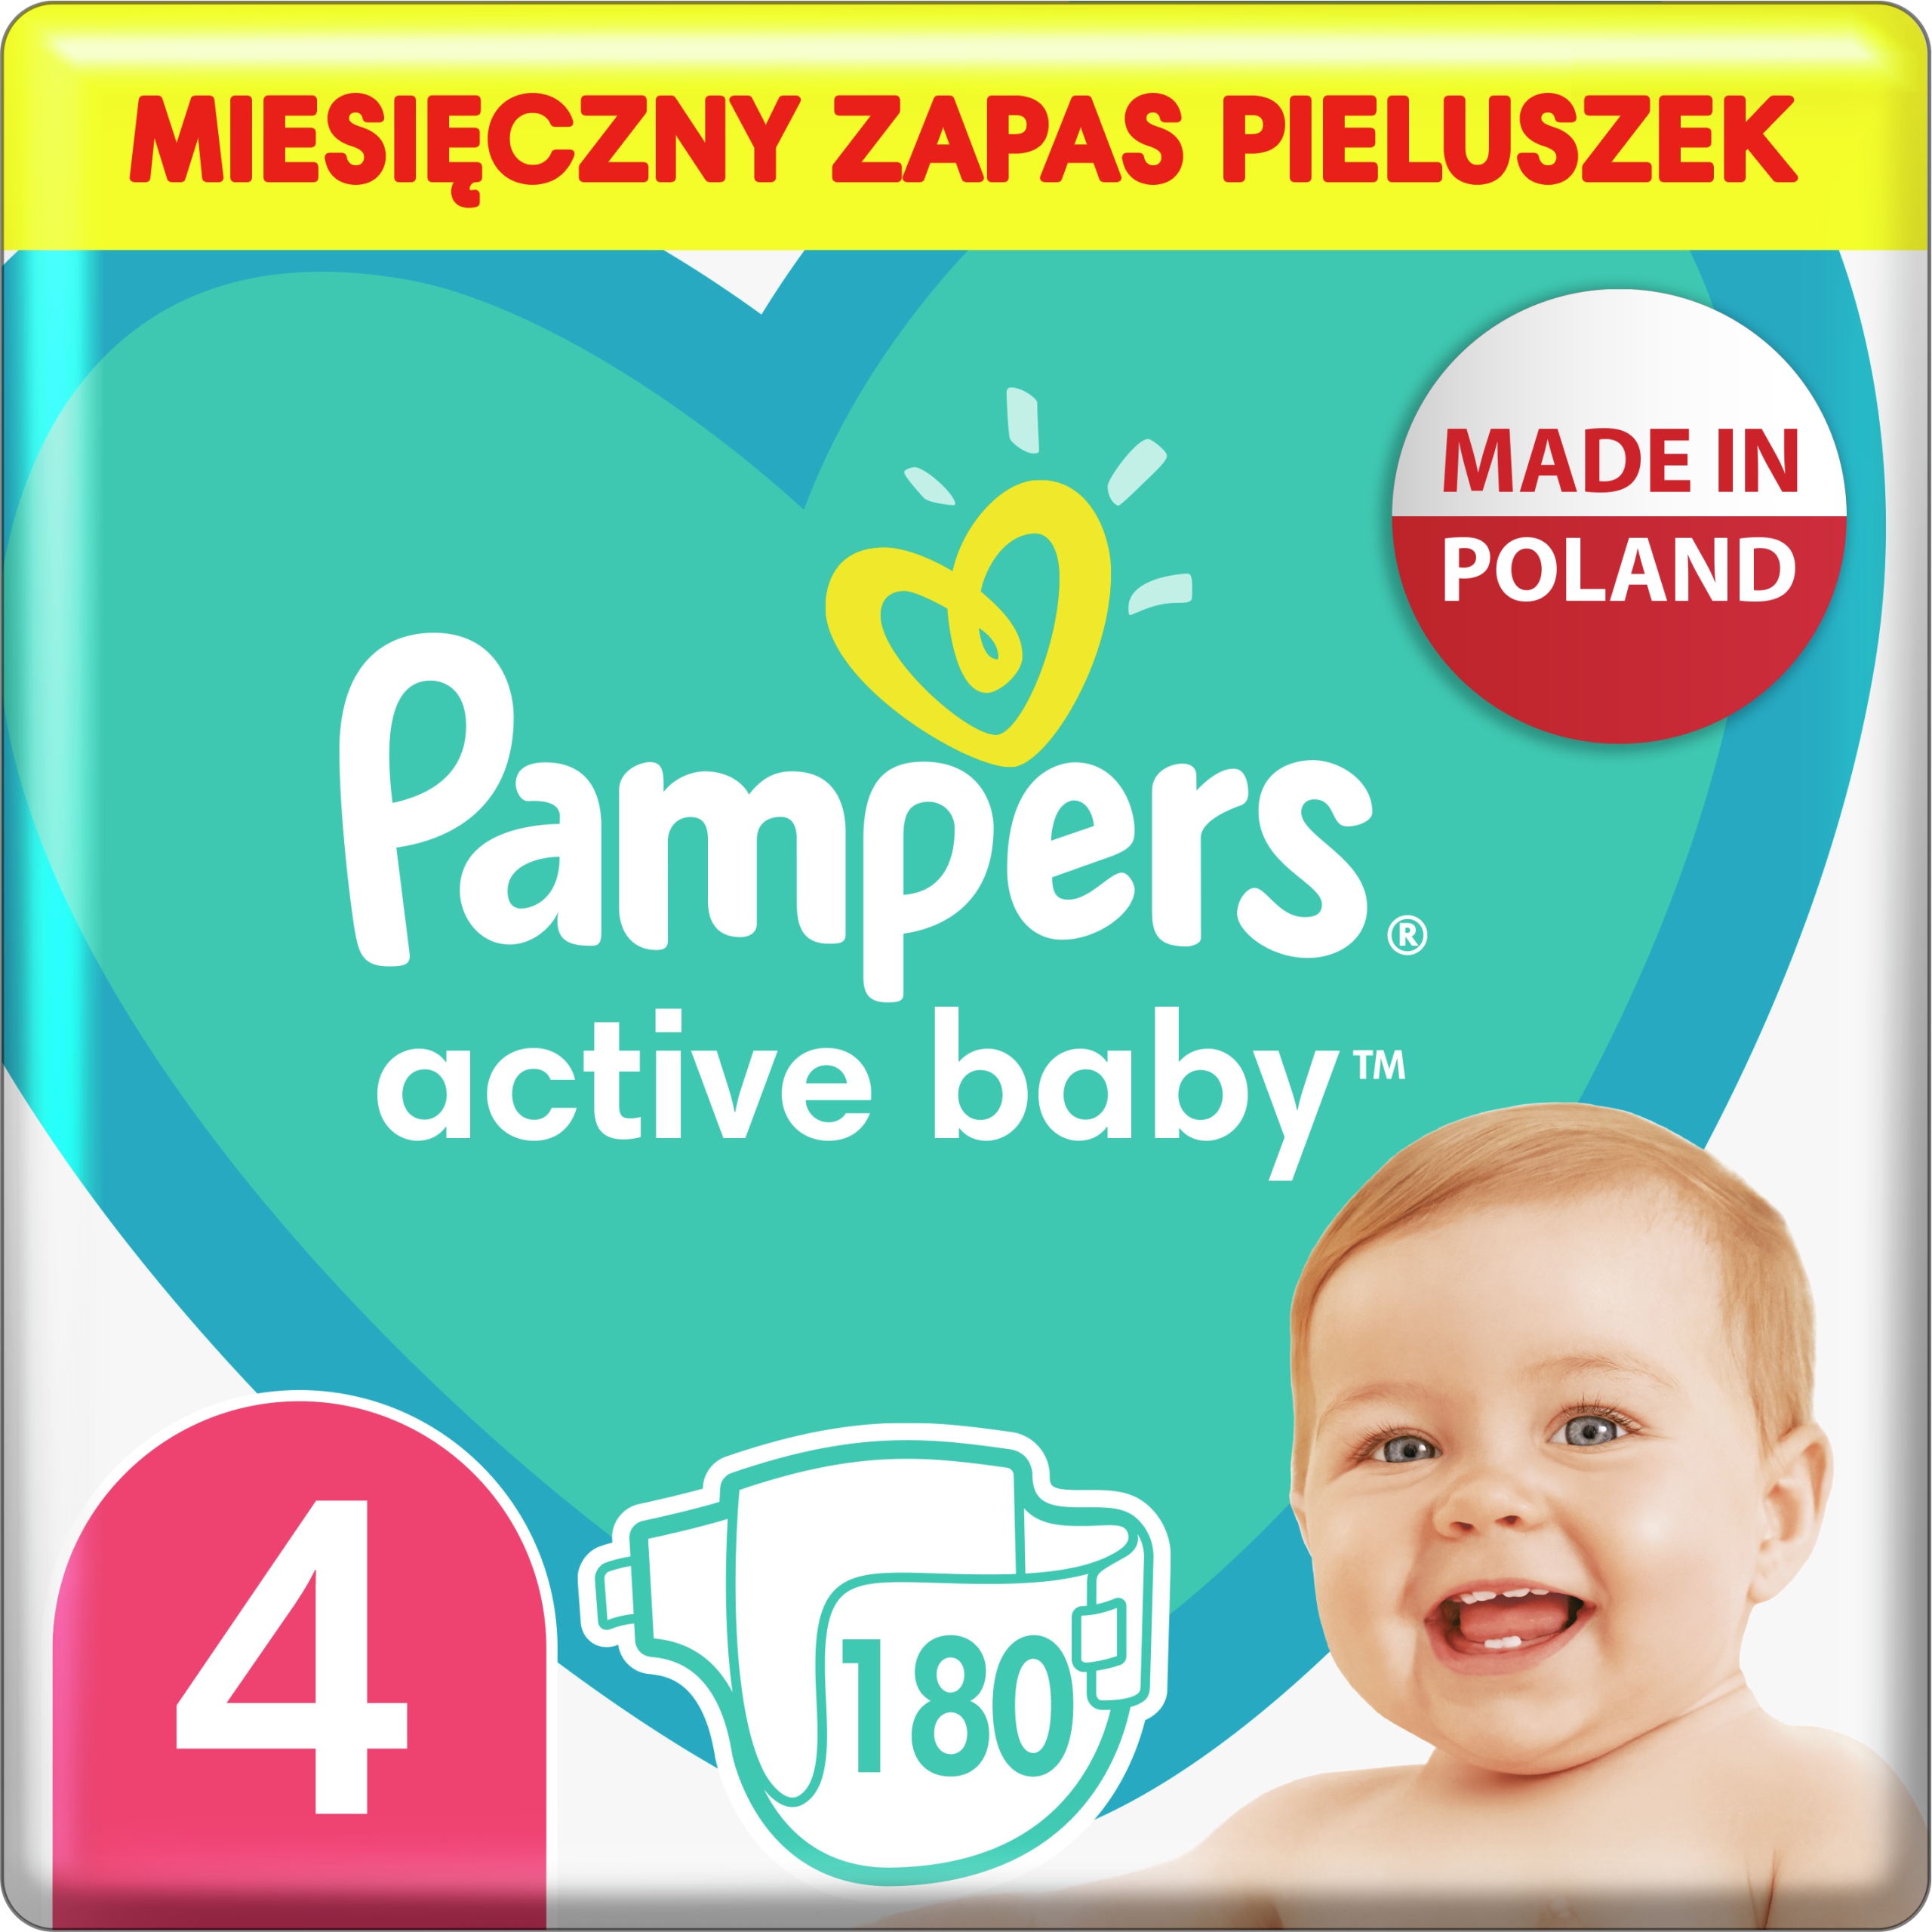 pampers premium care value pack